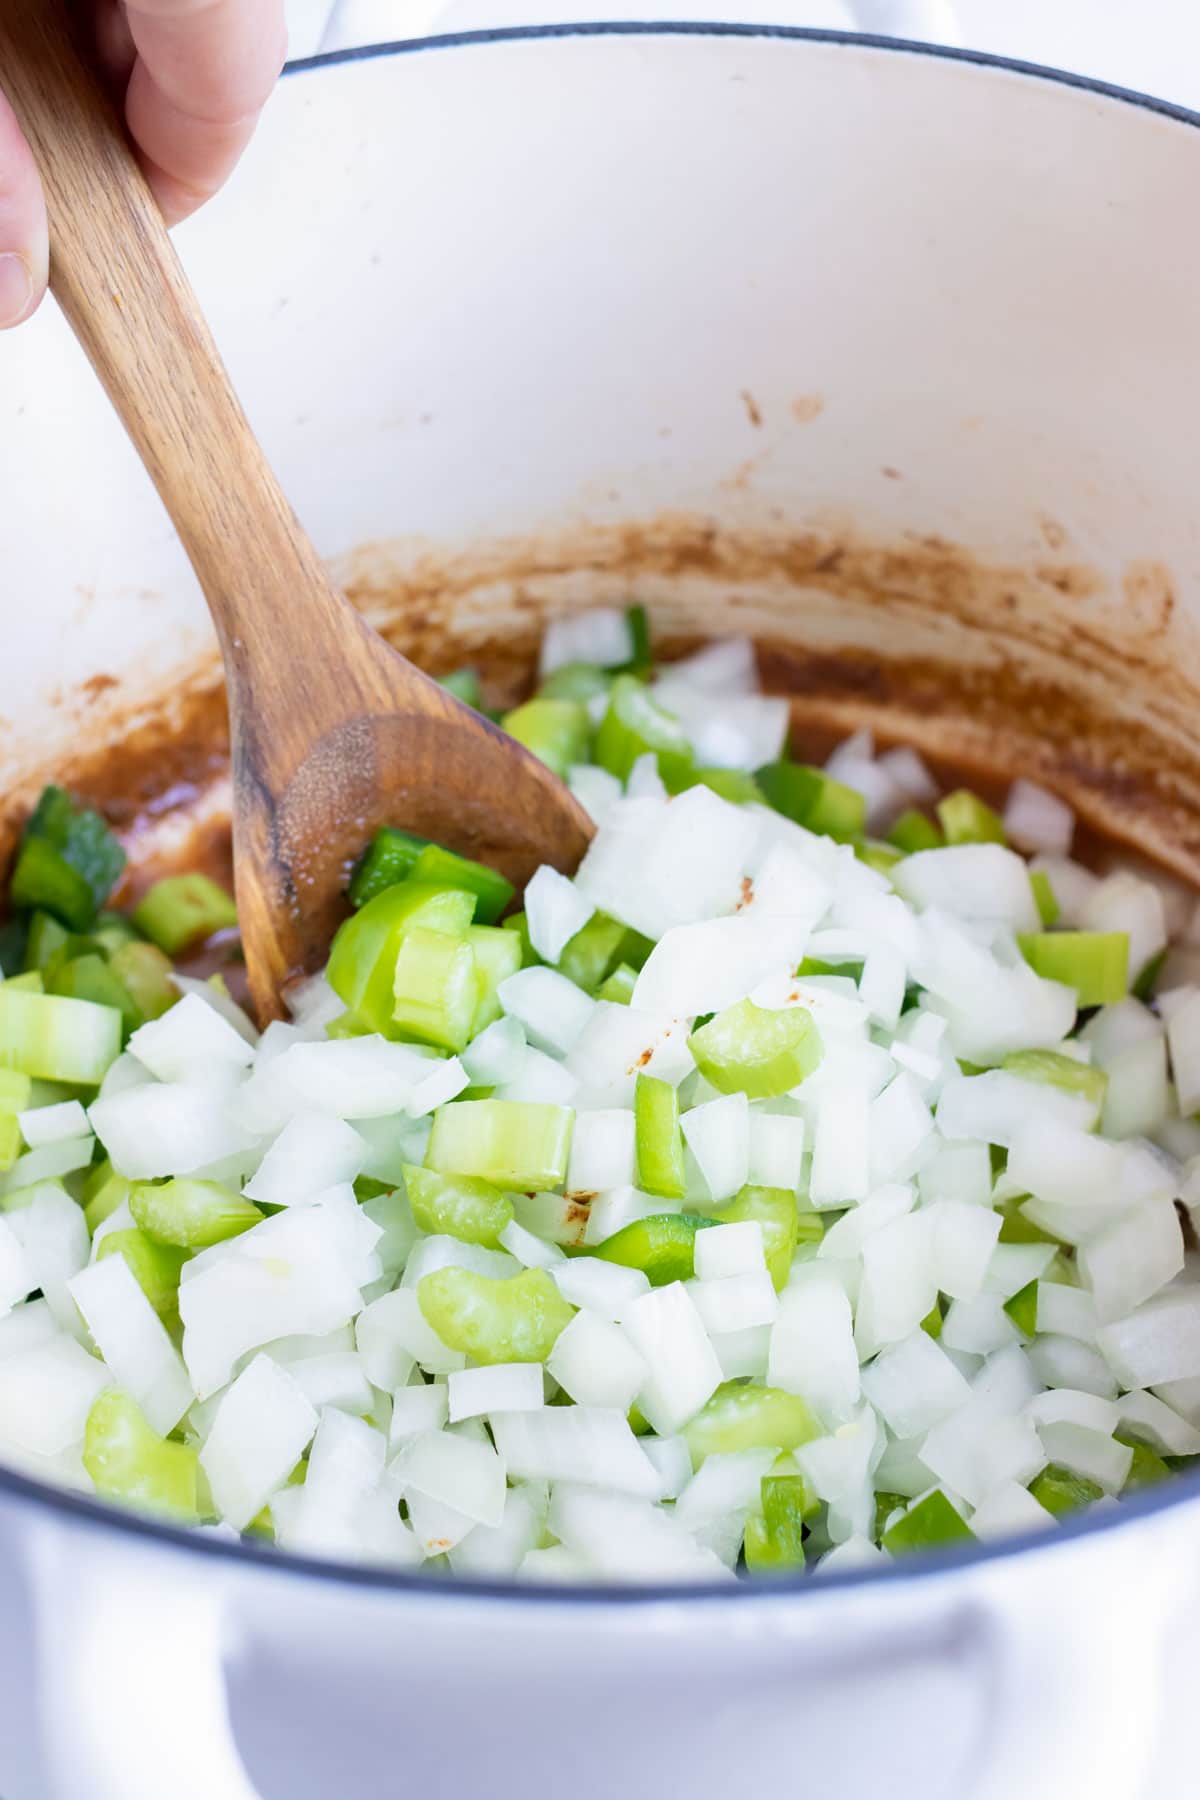 Onions, bell pepper, and celery are sautéed on the stove.